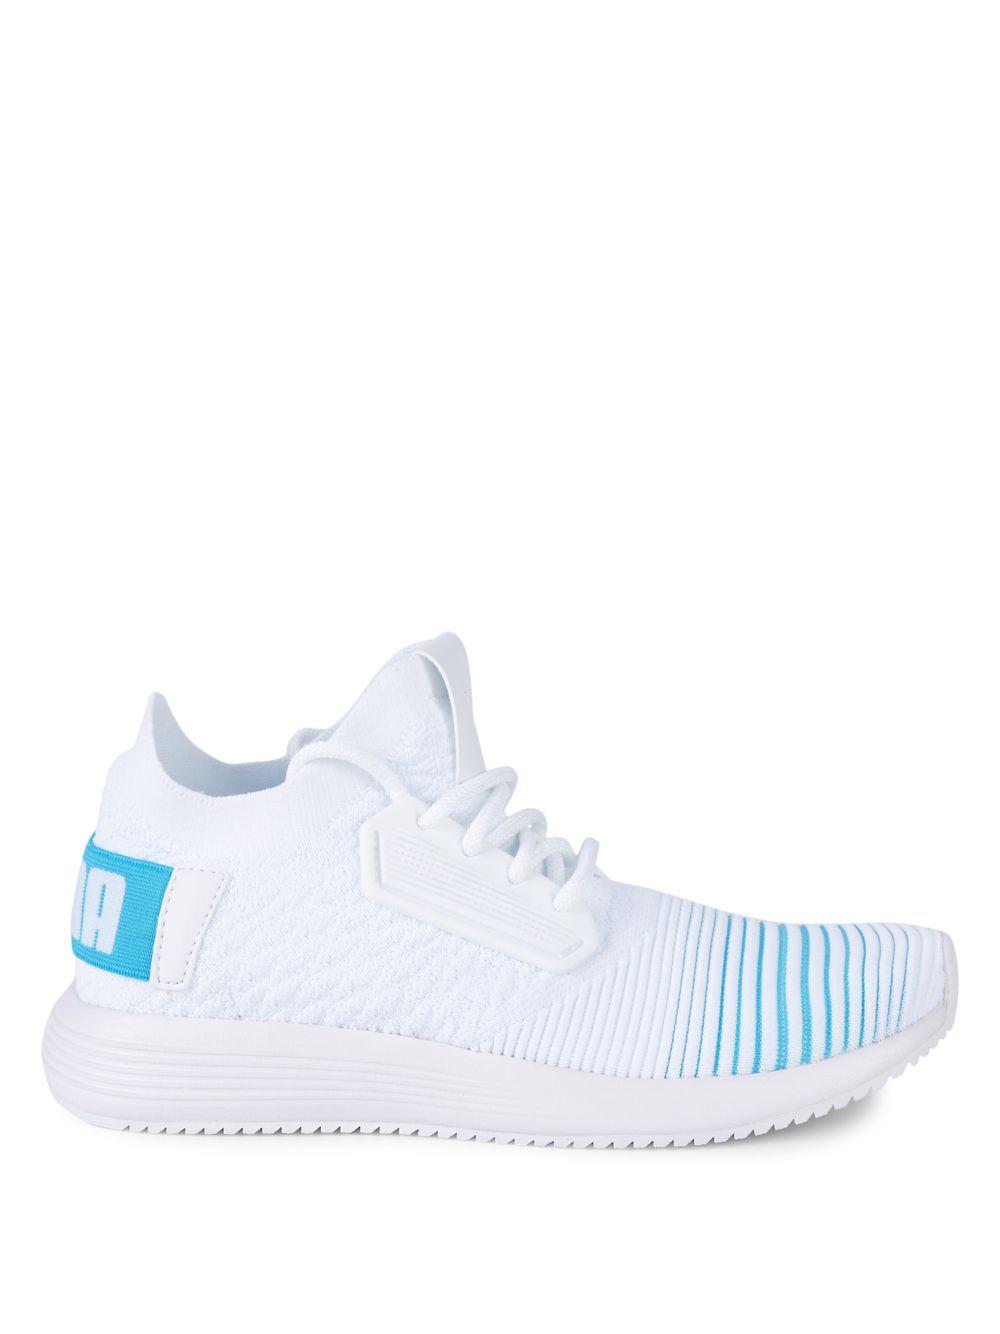 PUMA Rubber Uprise Color Shift Sneakers in White | Lyst